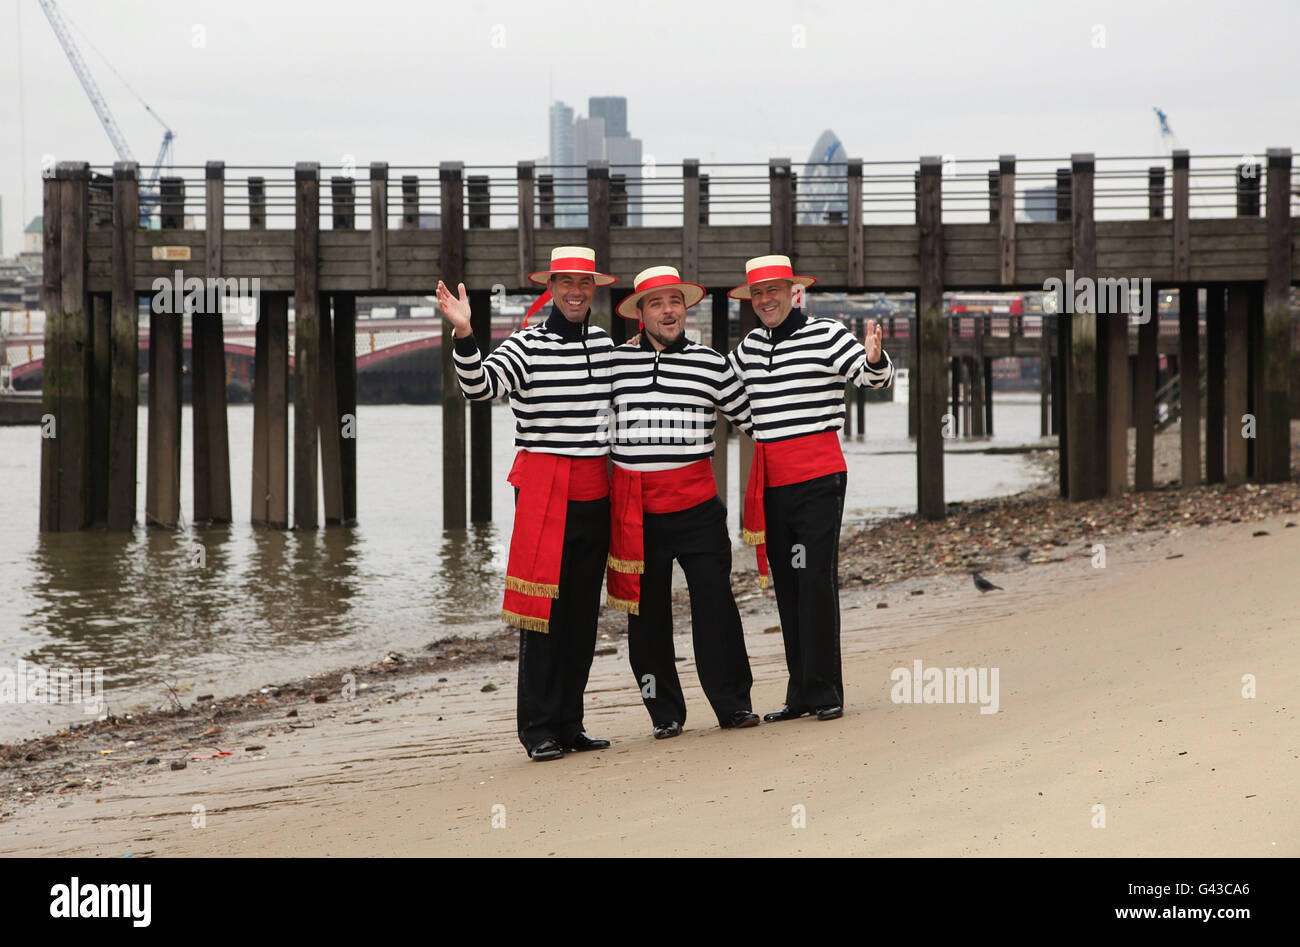 The Gondoliers (left to right) Michele Bozzato, Michael Malvich and Luca Foffano during a photocall as they sign a record deal with Universal Music - which will raise money and awareness for Venice in Peril, the fund working to save the Italian sinking city - on the South Bank in London. Stock Photo